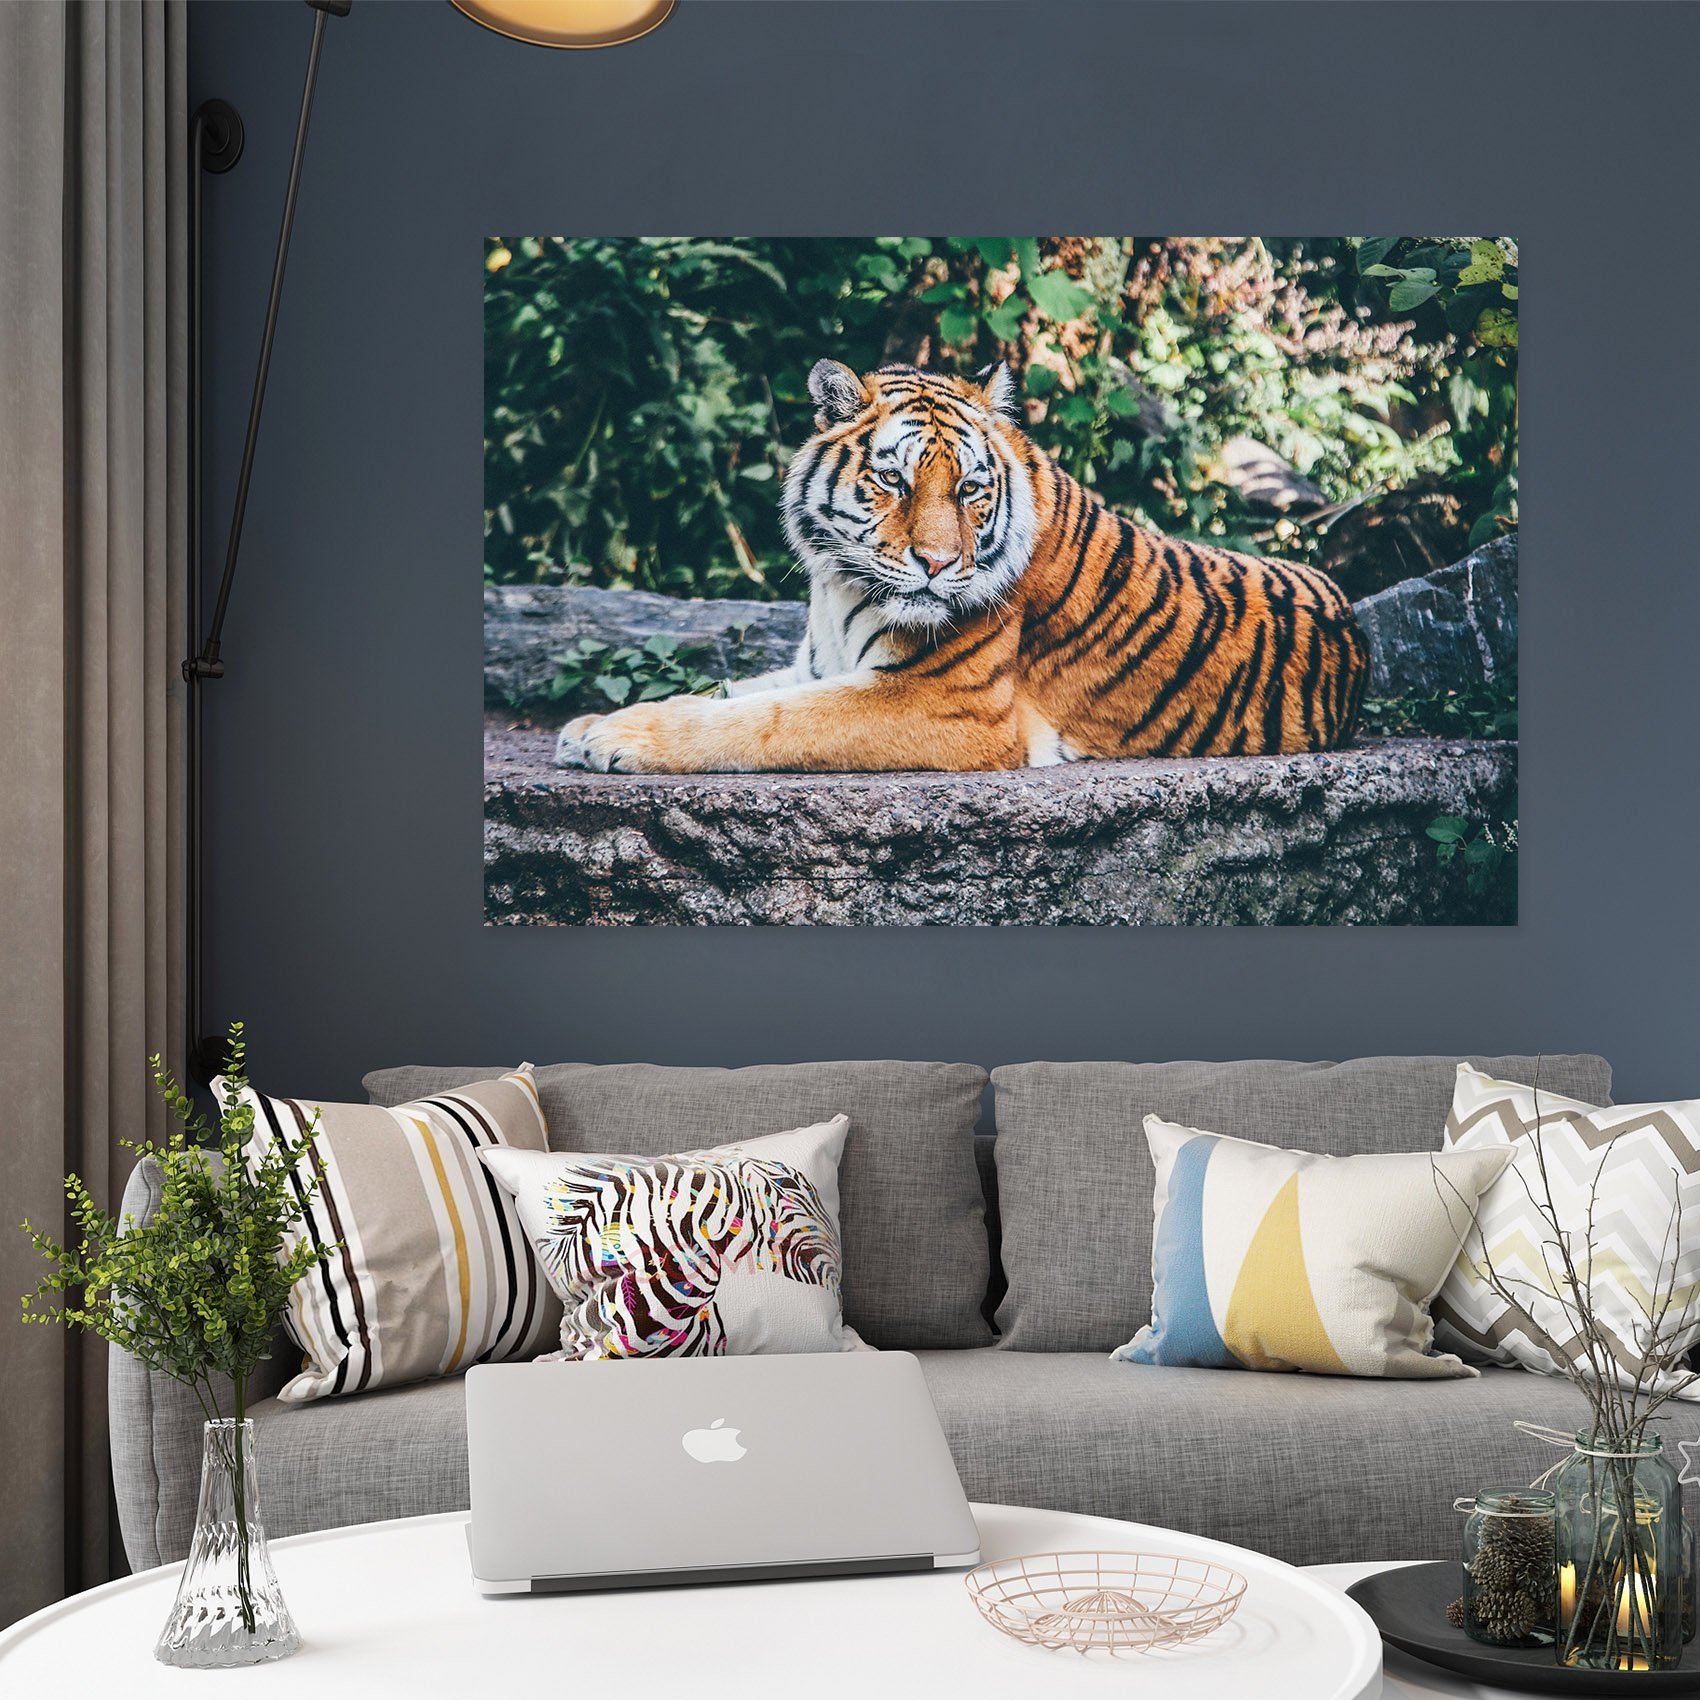 3D Tiger In The Forest 15 Animal Wall Stickers Wallpaper AJ Wallpaper 2 